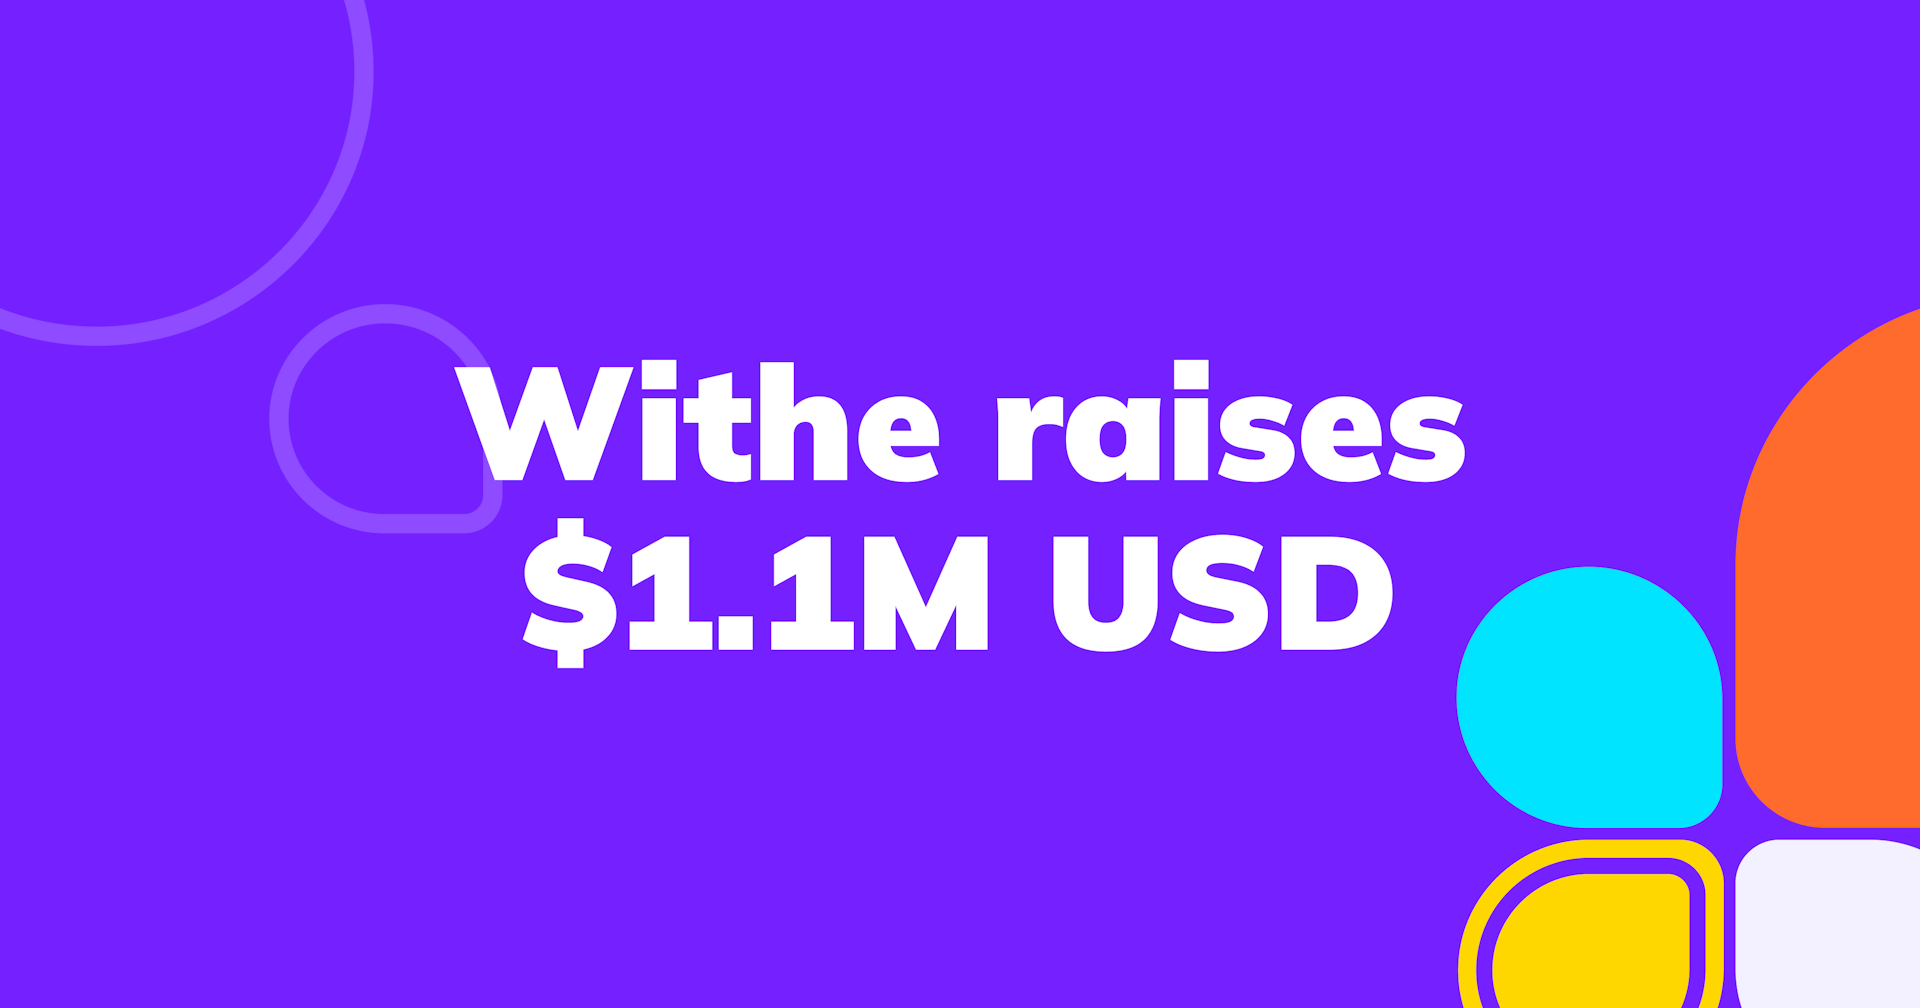 Withe raises $1.1 million USD in pre-seed funding